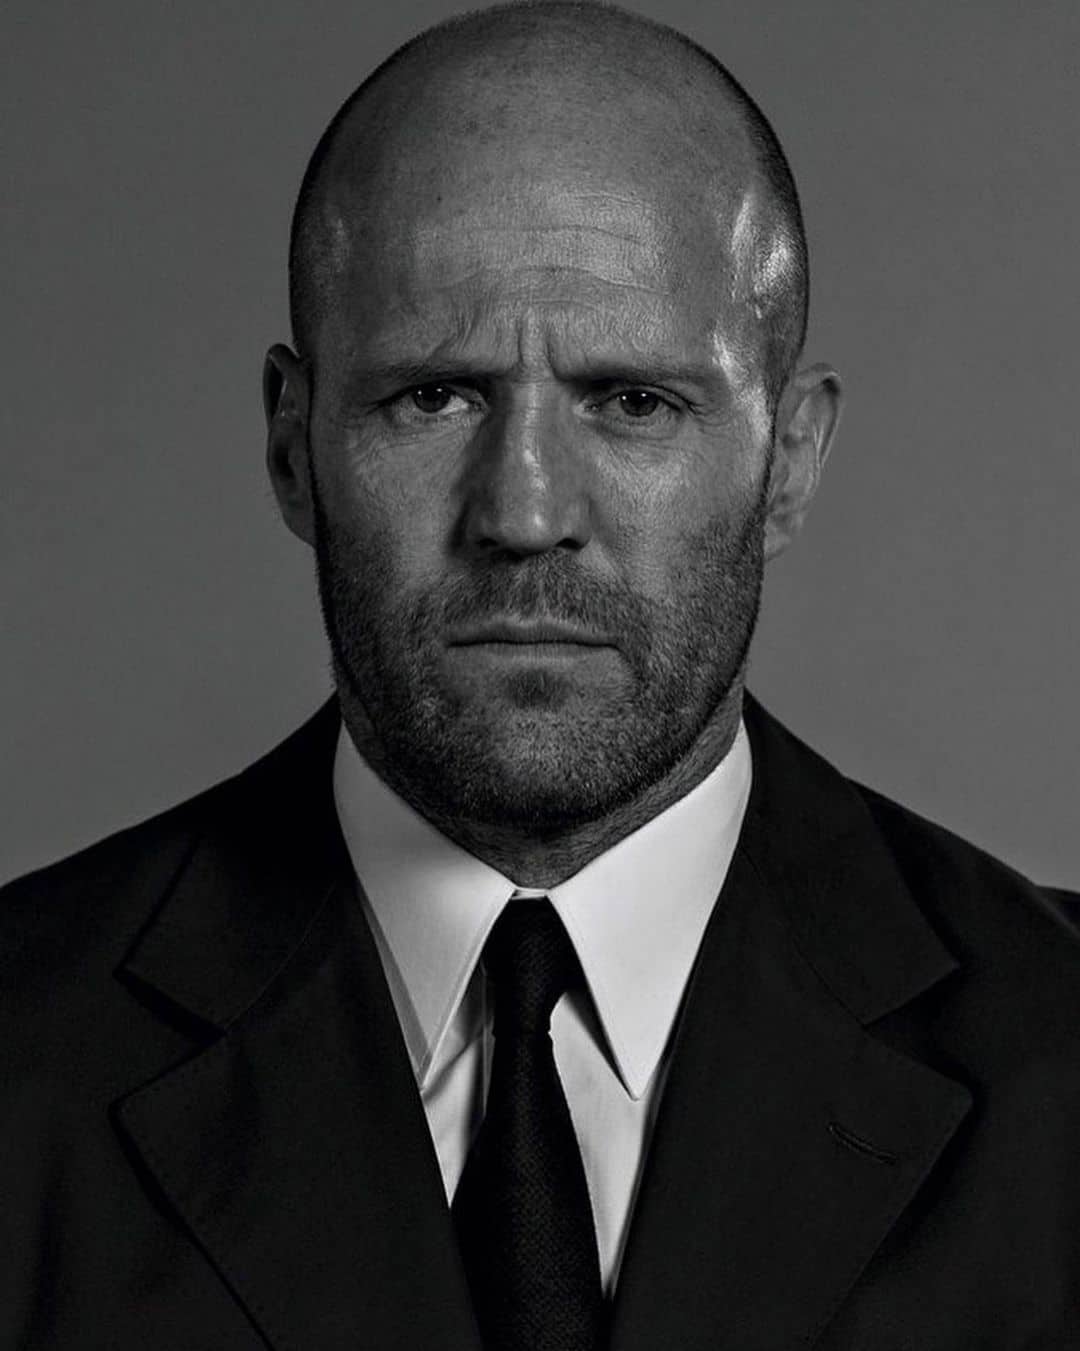 Jason Statham Net Worth, Films, Height, Age, And Many More